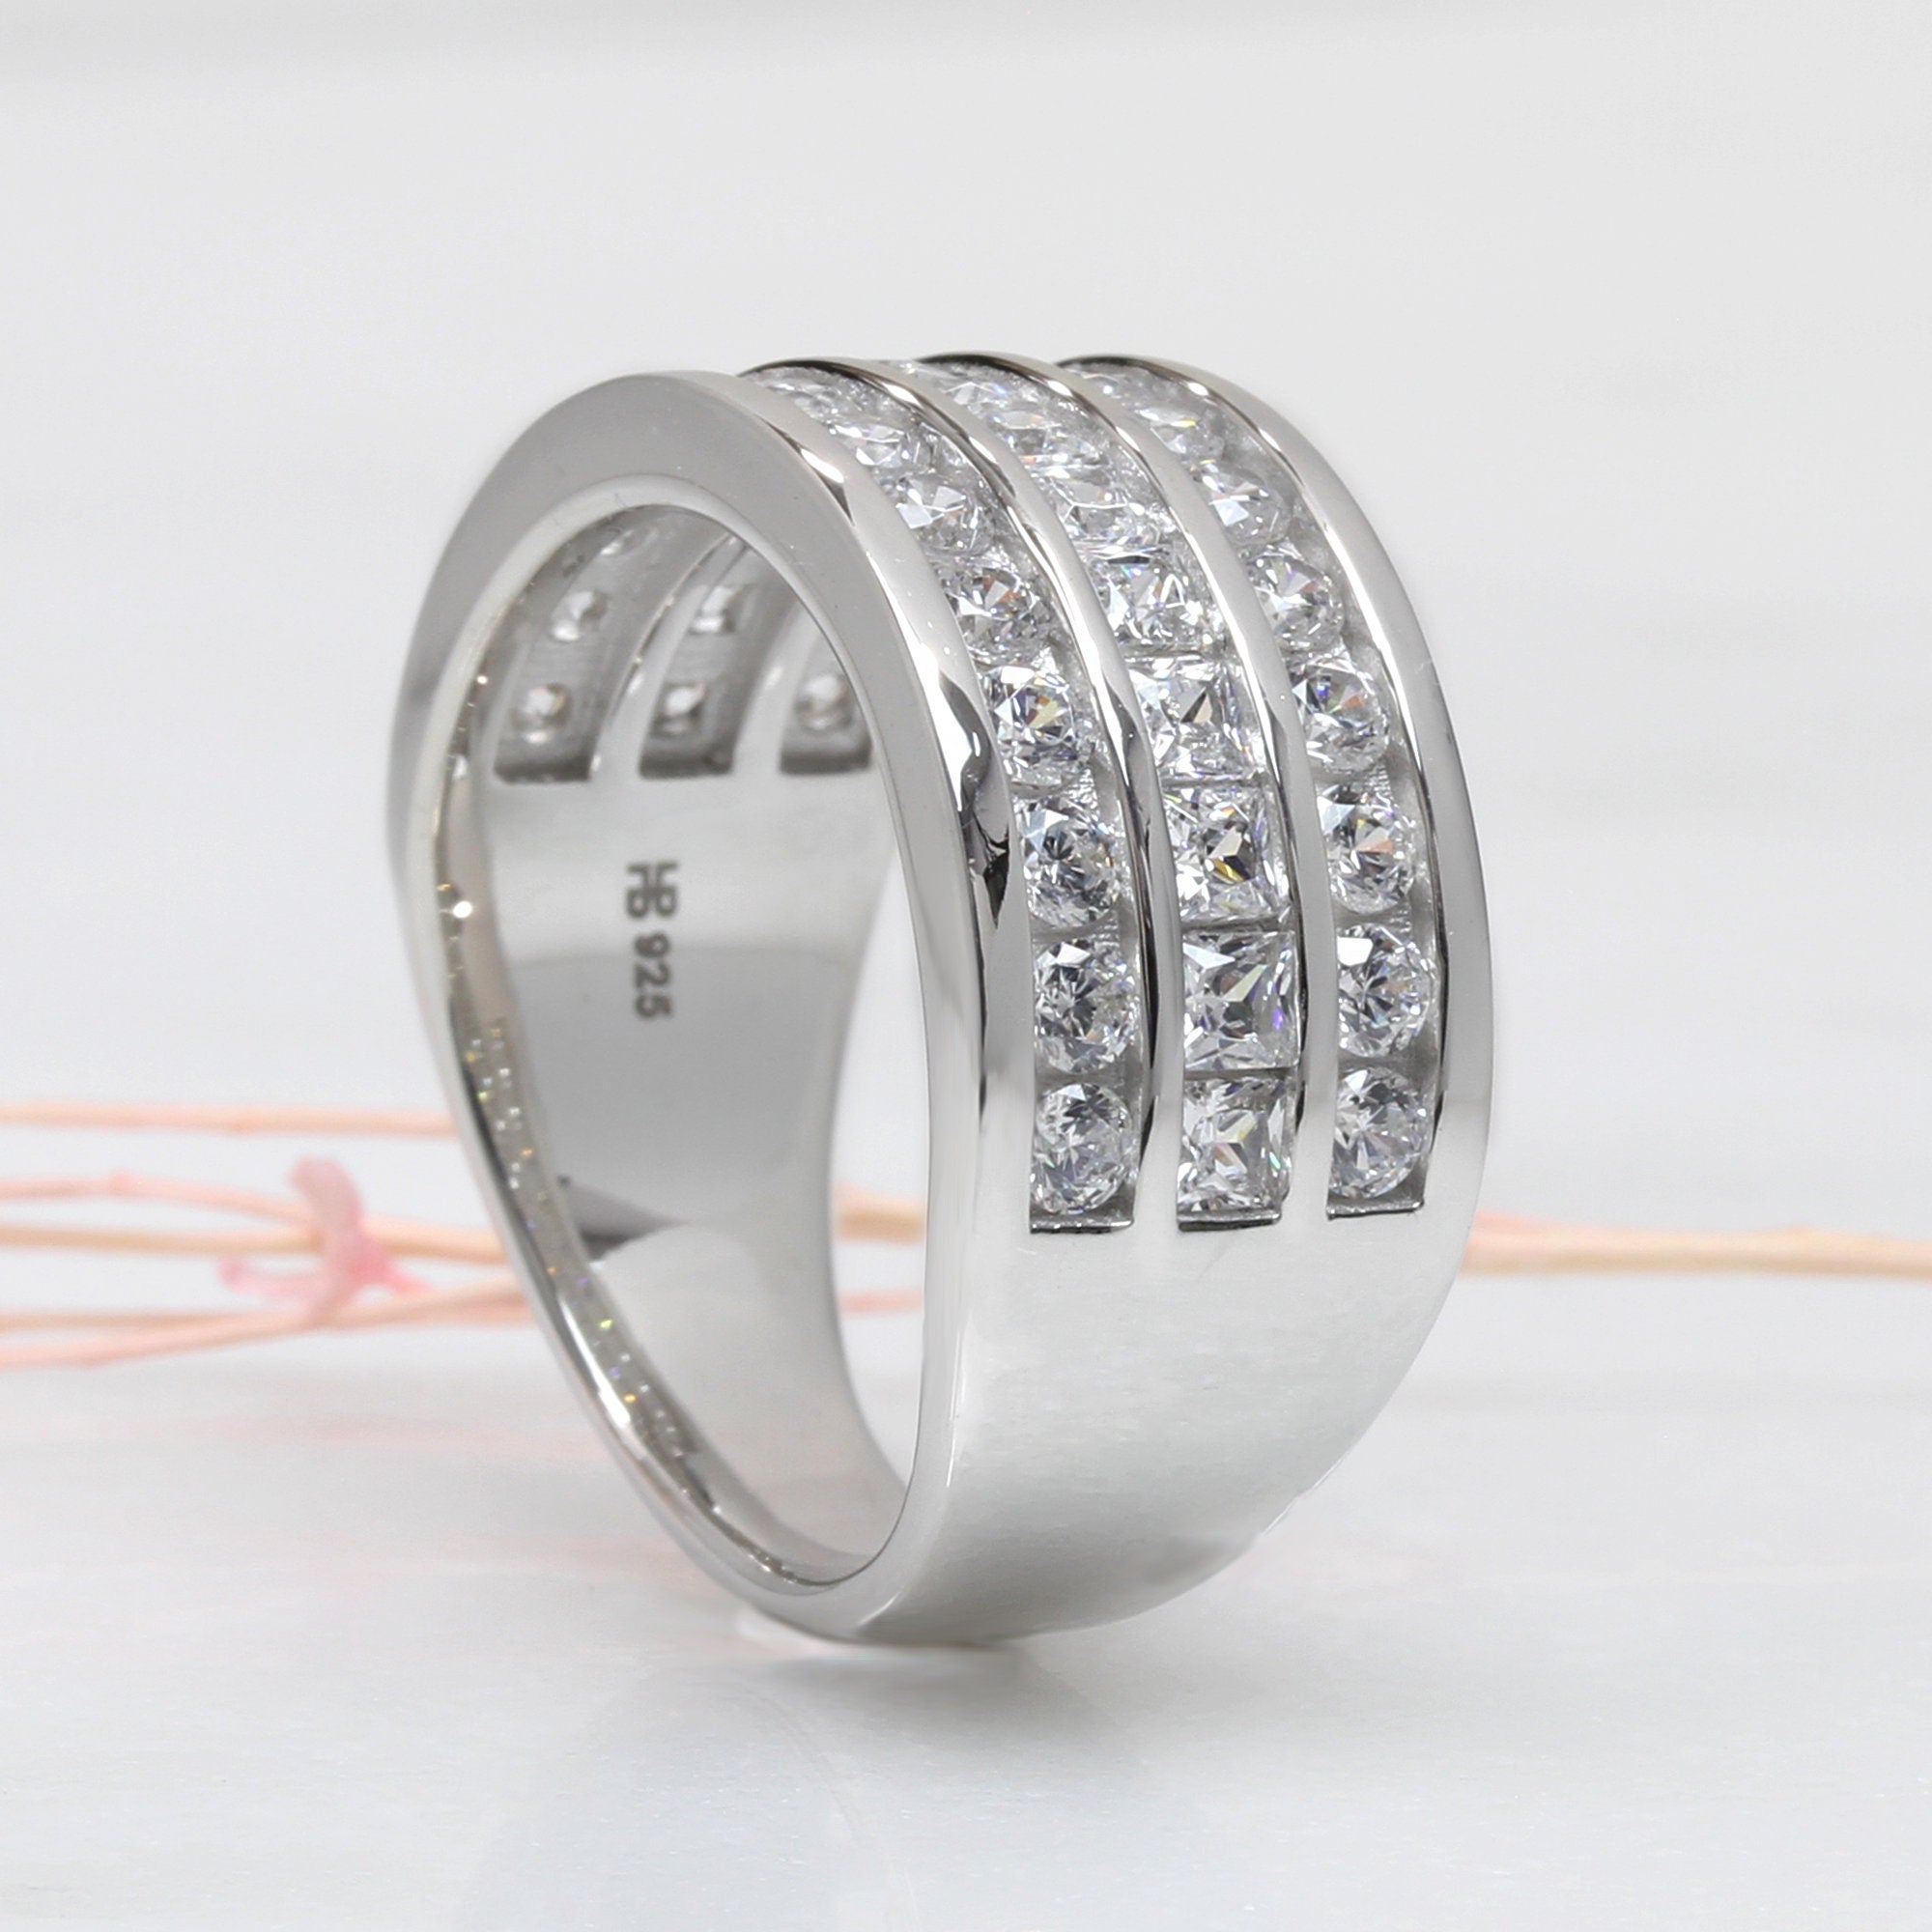 10mm Wide Three Row Wedding Band In Sterling Silver – shine of diamond